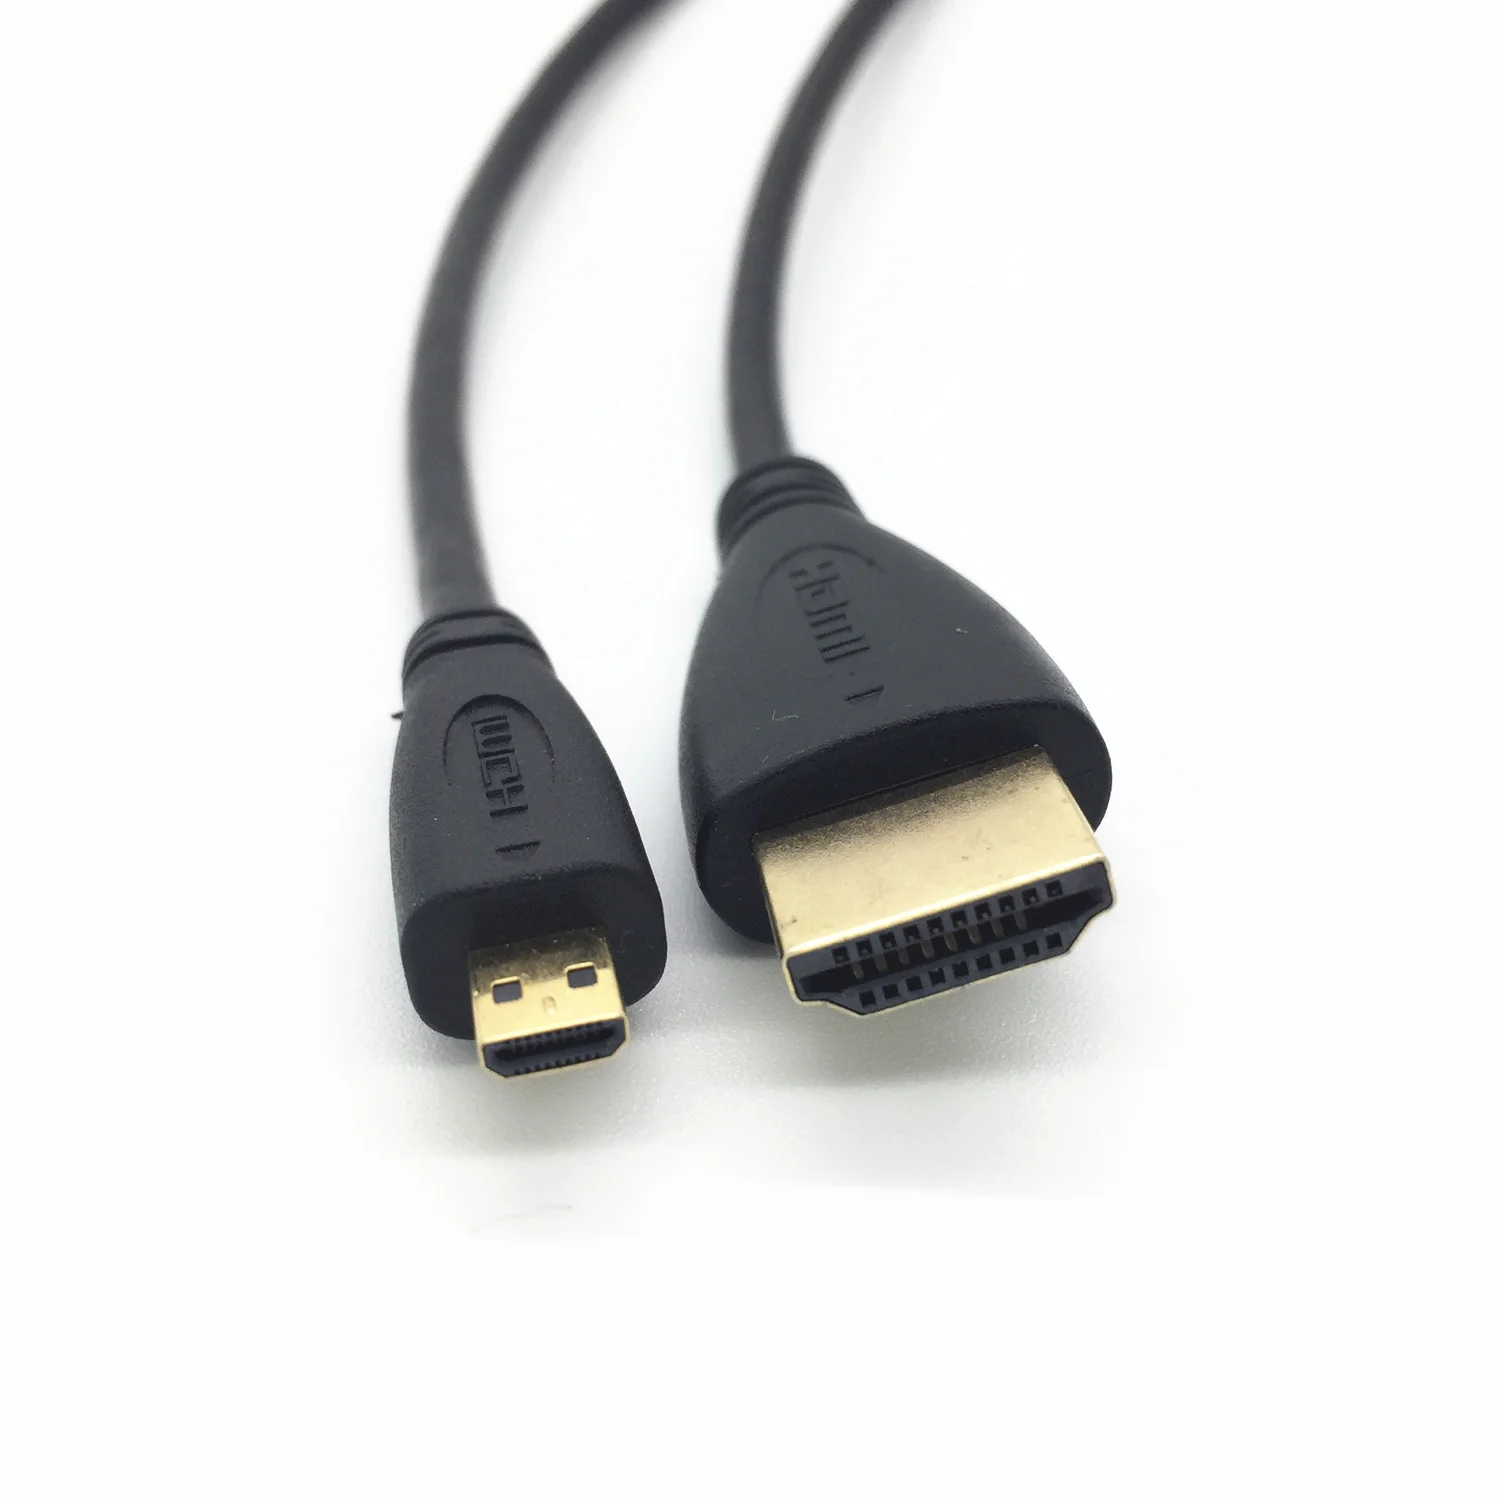 HDMI Male To Micro HDMI Adapter Converter Cable Cord for Pan